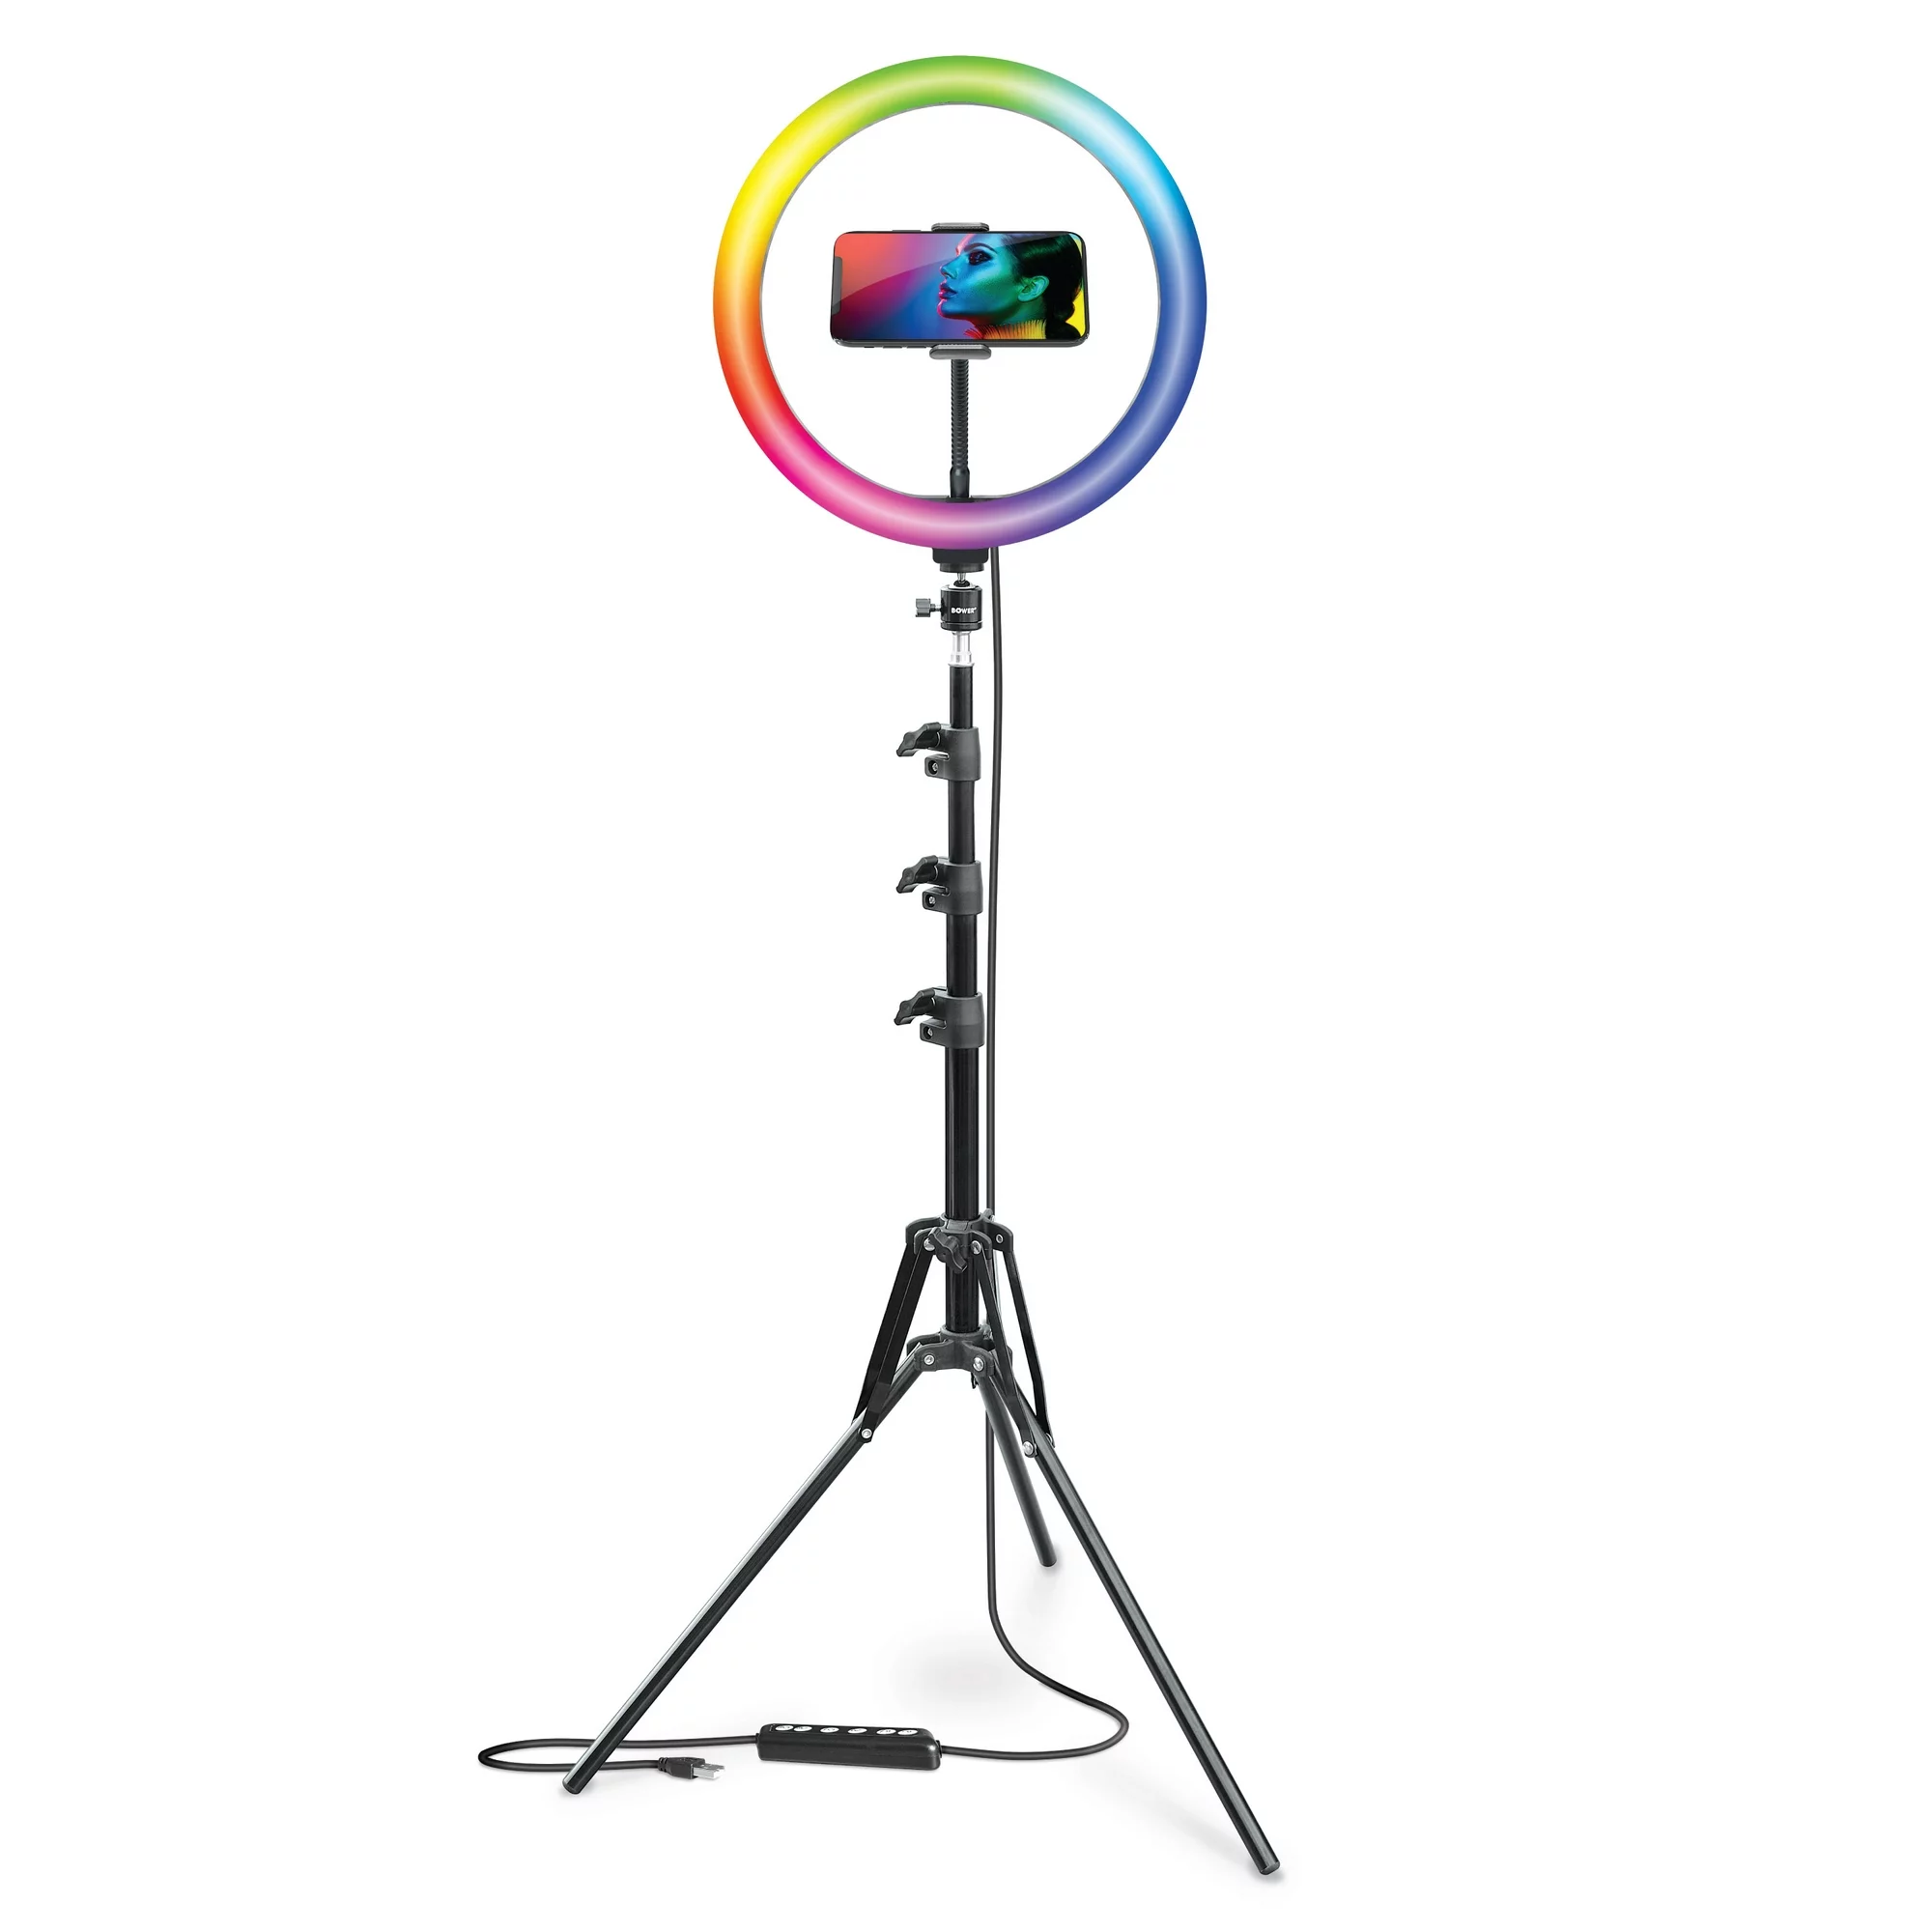 Bower 12-inch LED RGB Ring Light Studio Kit with Special Effects; Black - $98.00